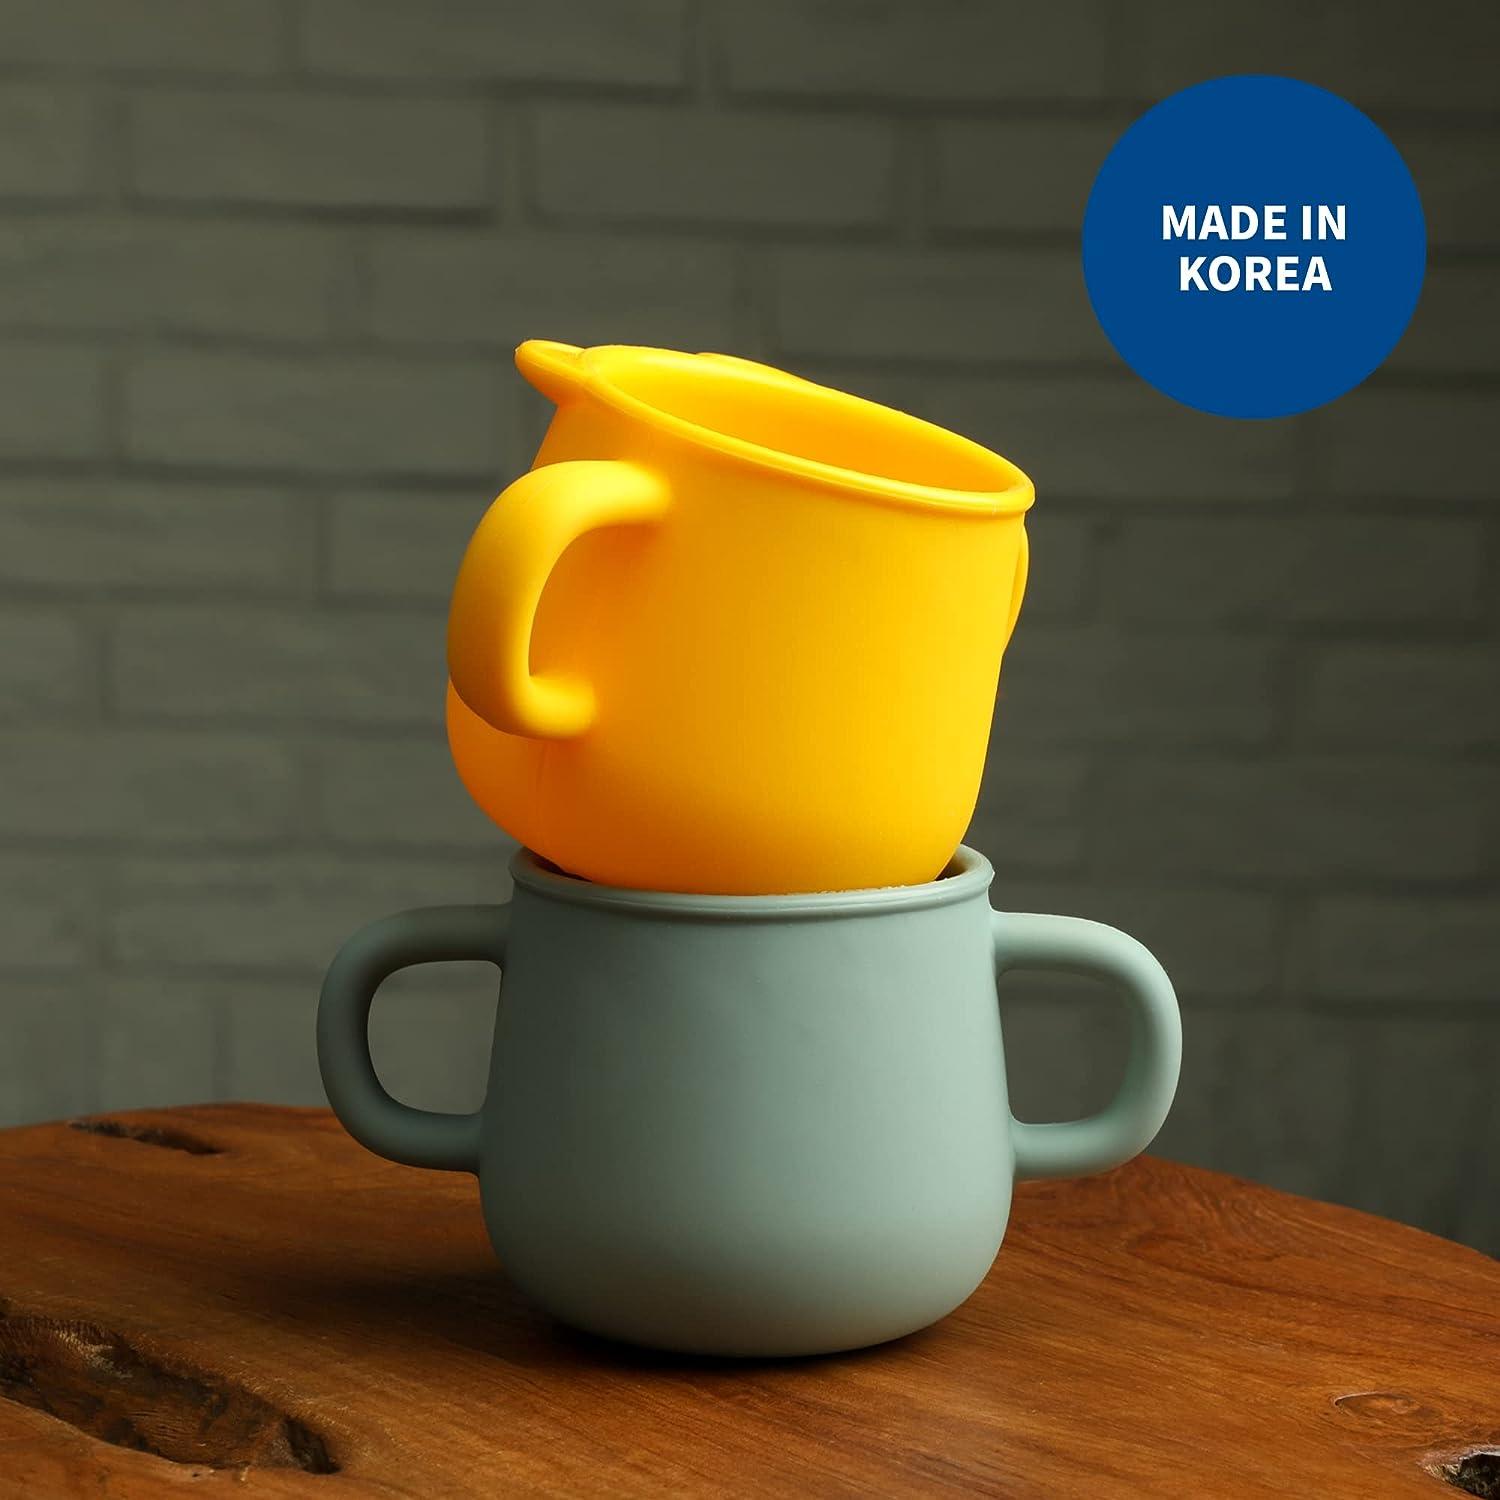 Blue Ginkgo Silicone Toddler Cups - Open Cup for Baby with Handles | Made in Korea | 8oz Training Open Cups for Toddlers 1-3 (Yellow)